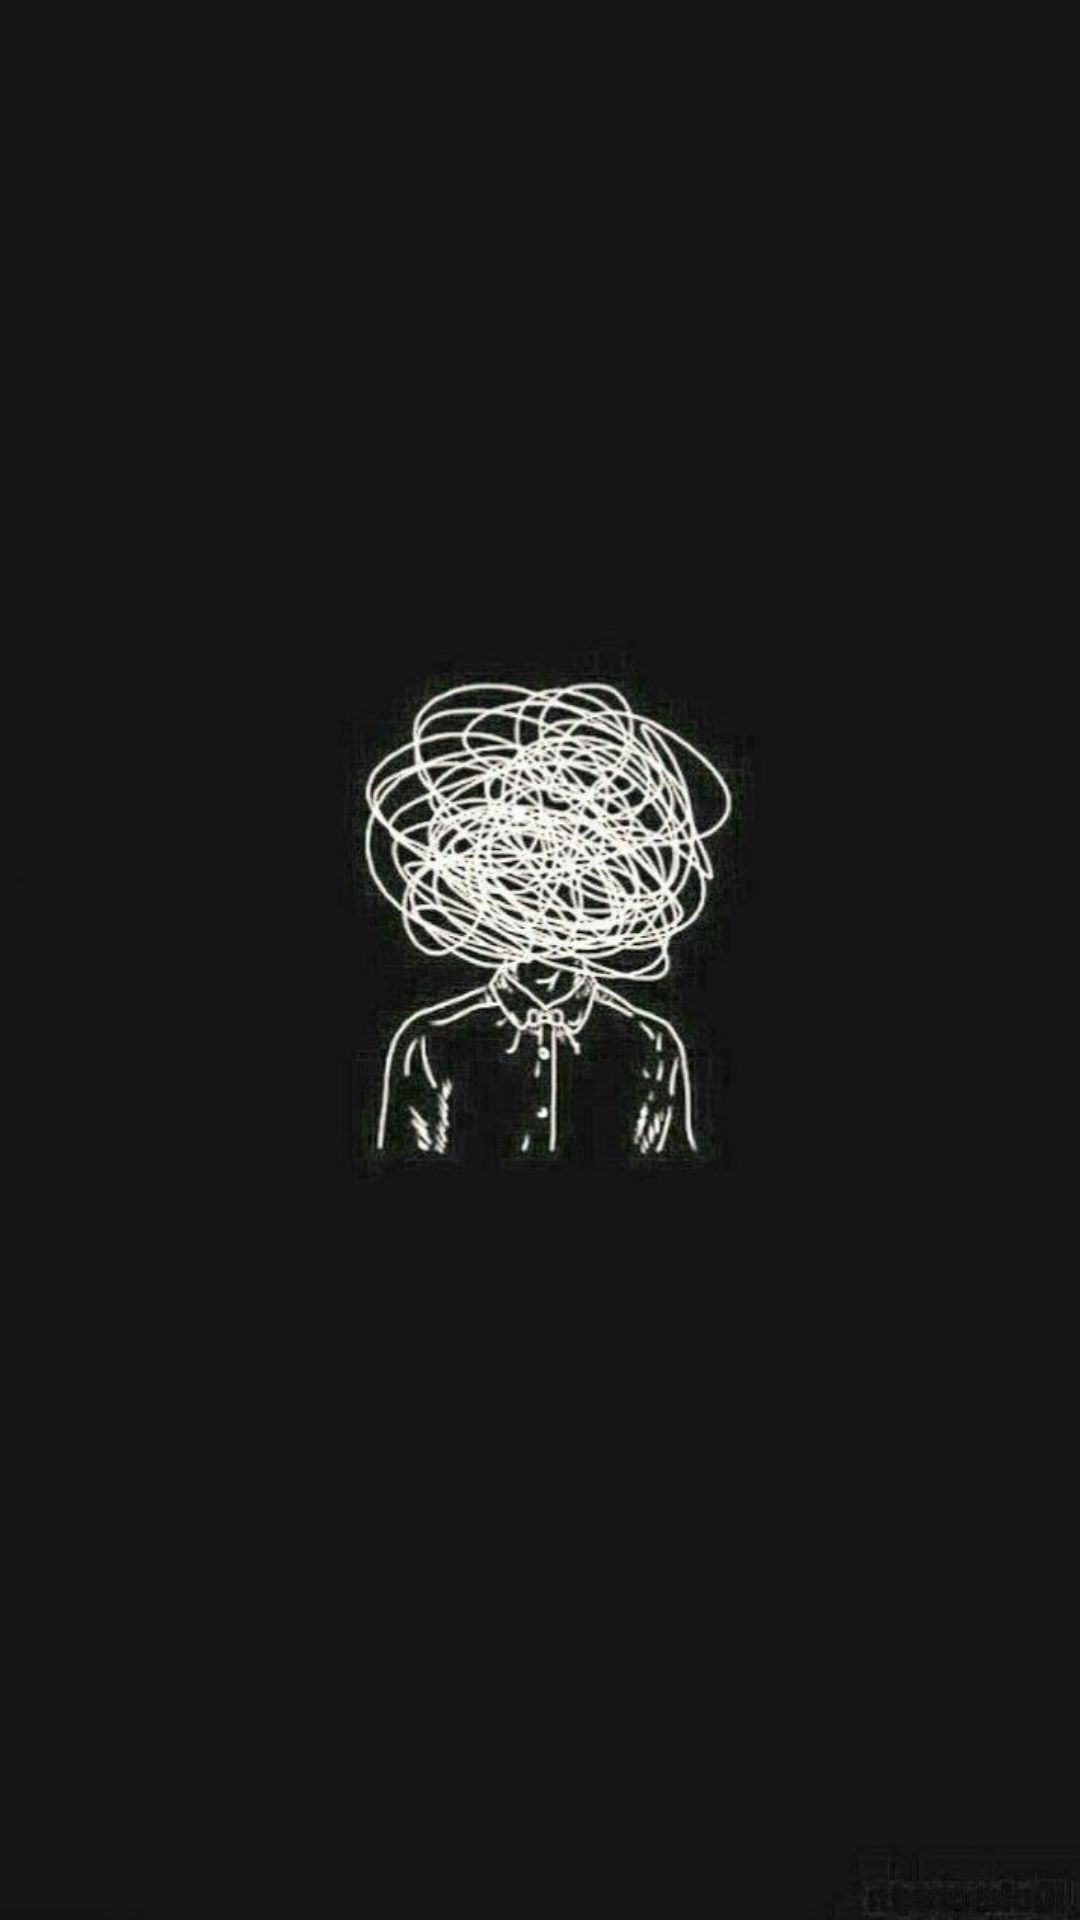 A man with scribbles for a head, black background - Dark, trippy